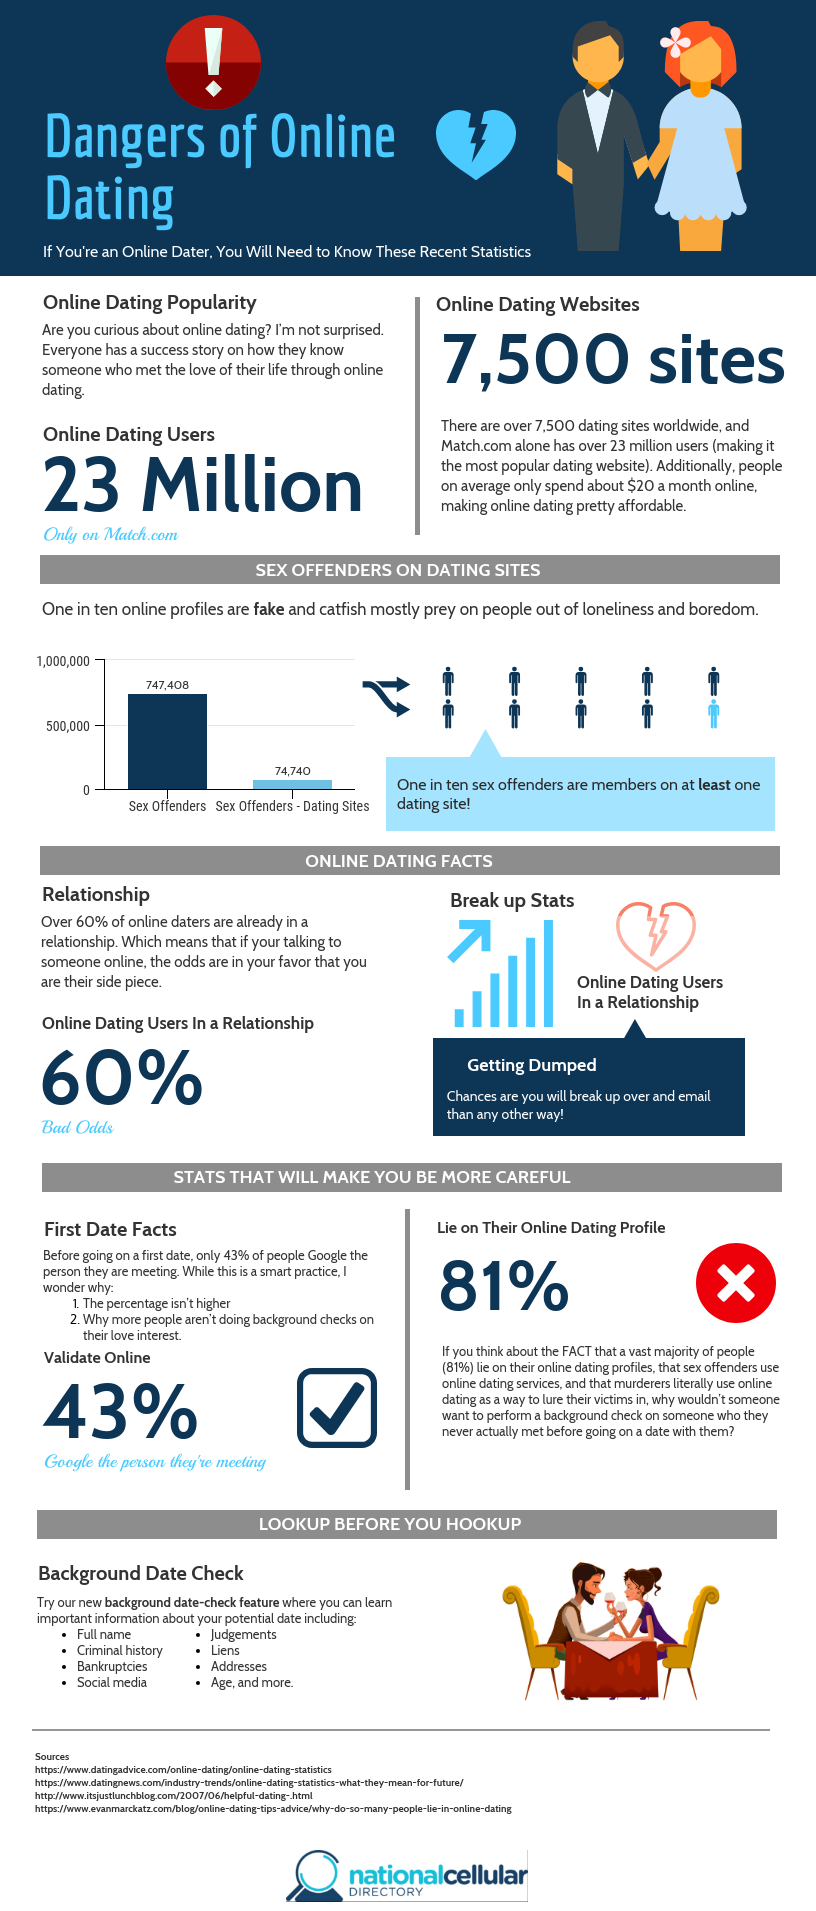 Dangers of Online Dating Infographic